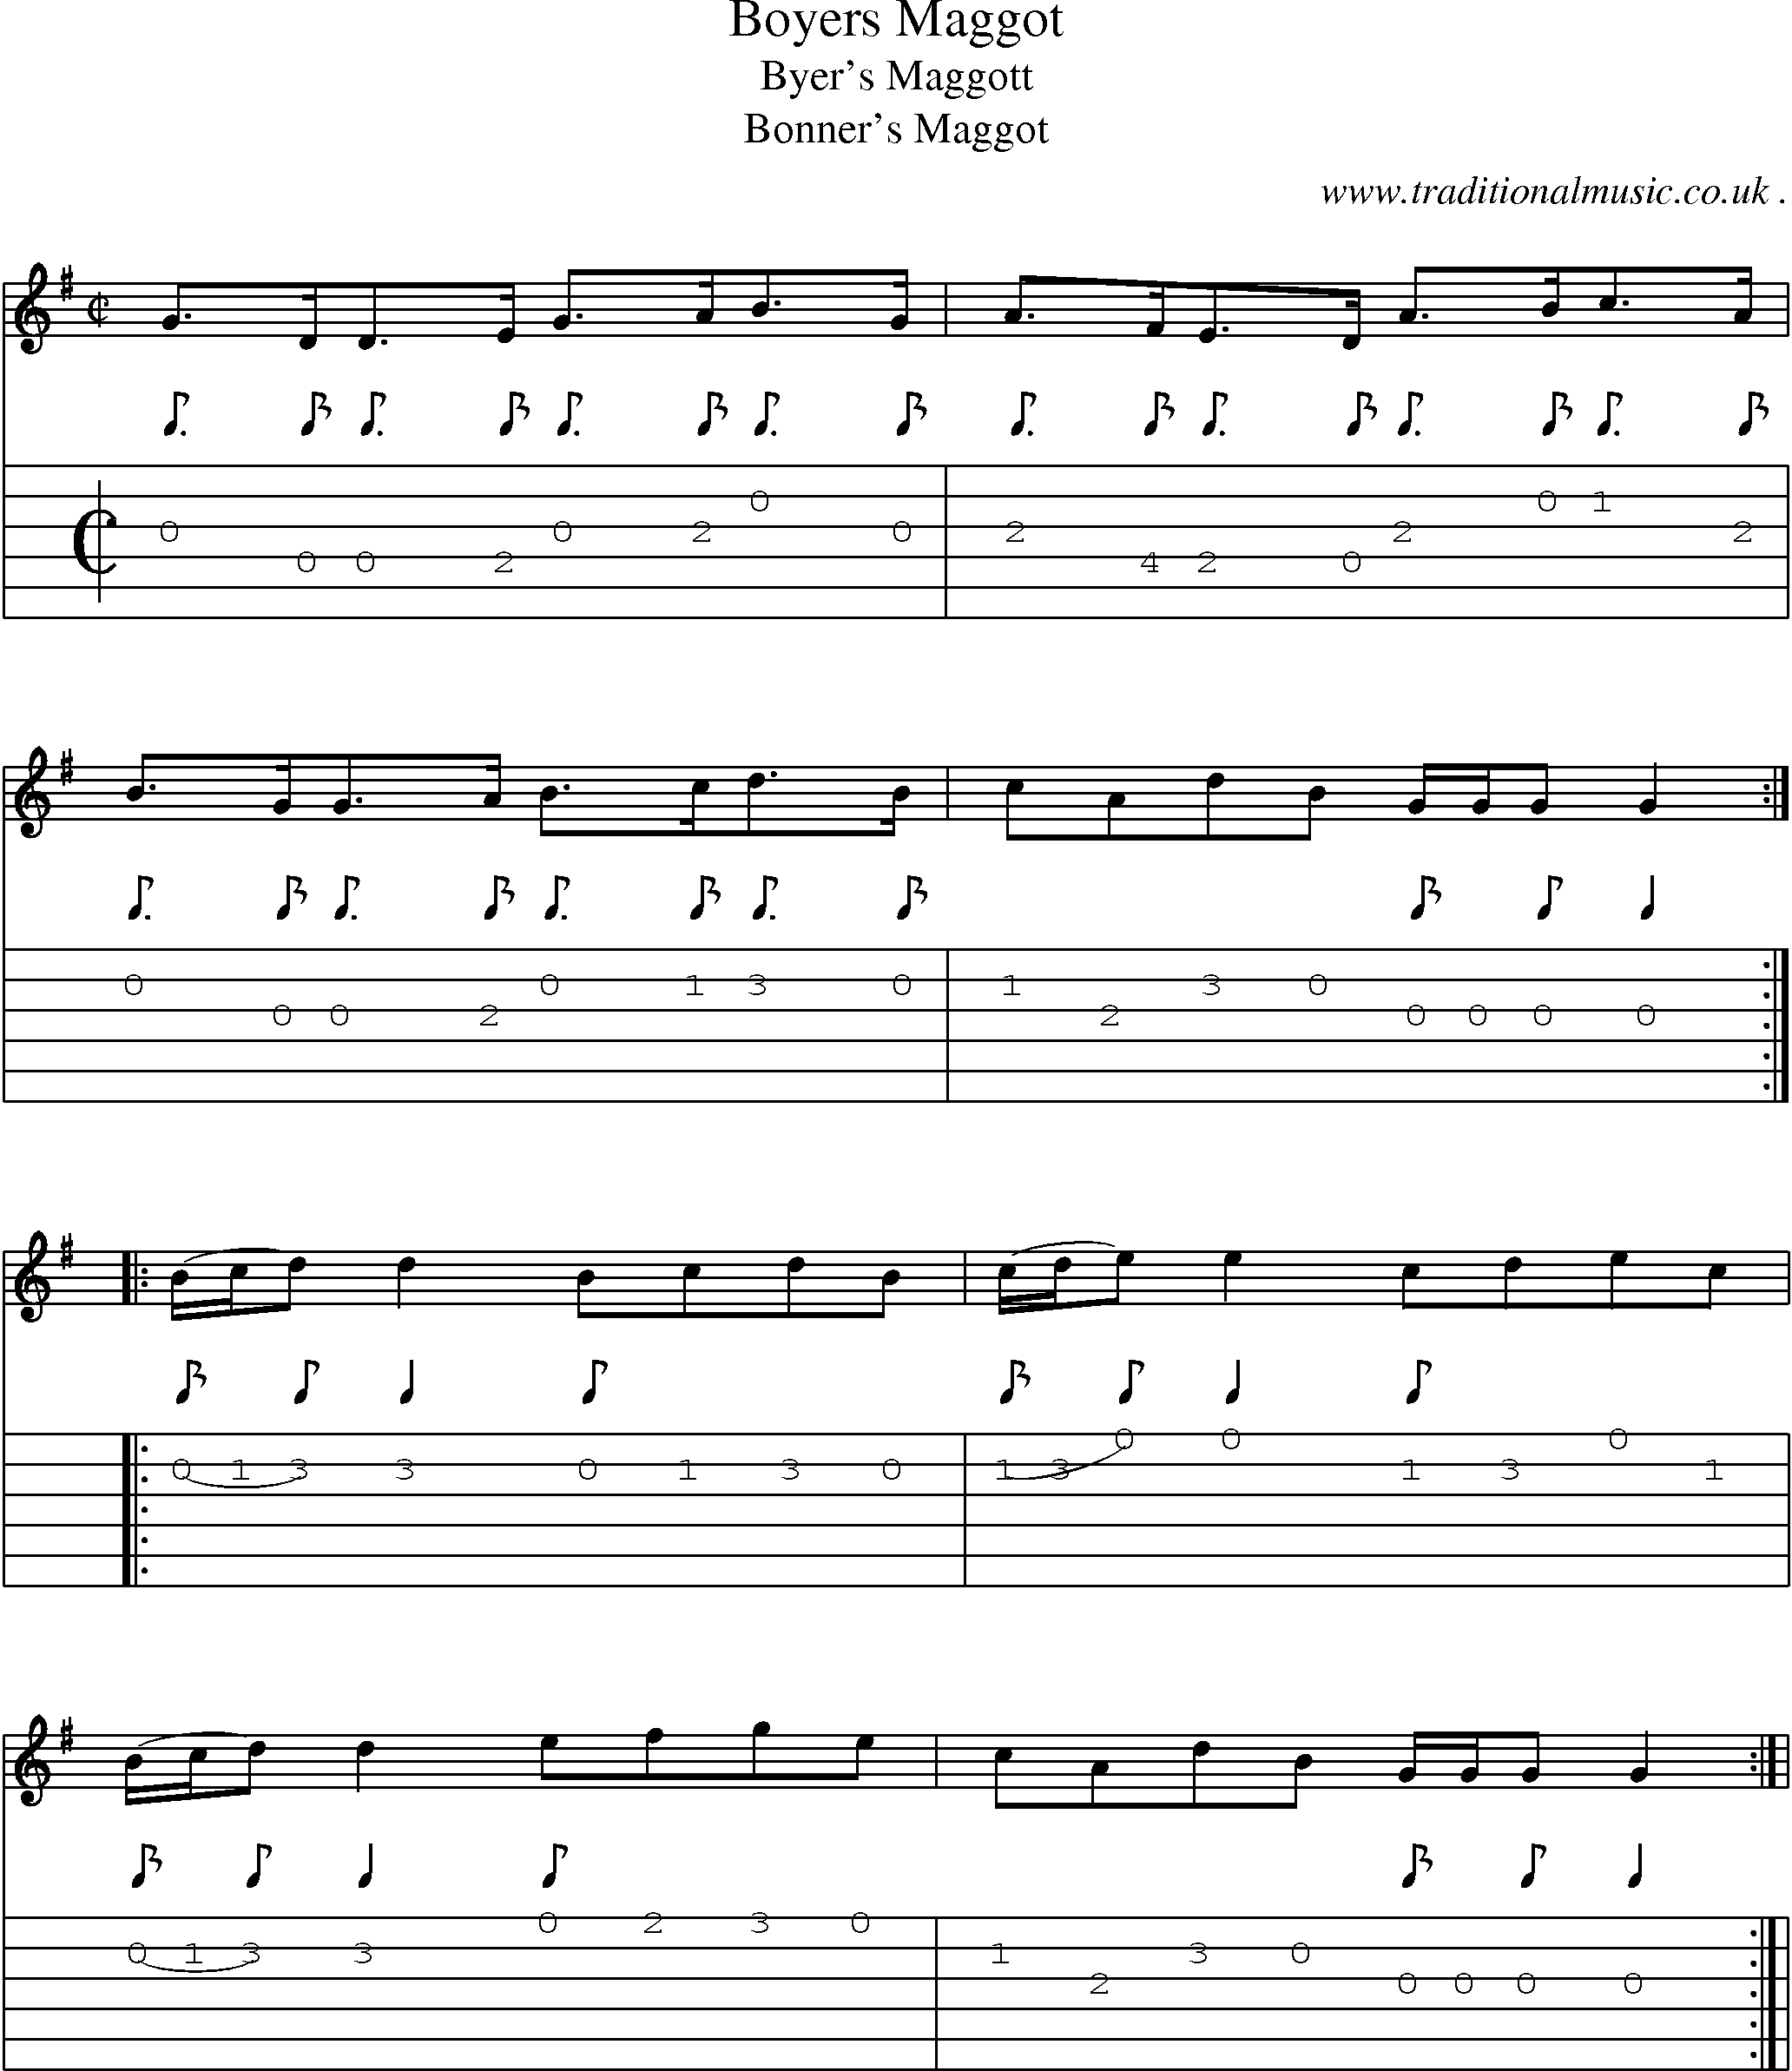 Sheet-Music and Guitar Tabs for Boyers Maggot